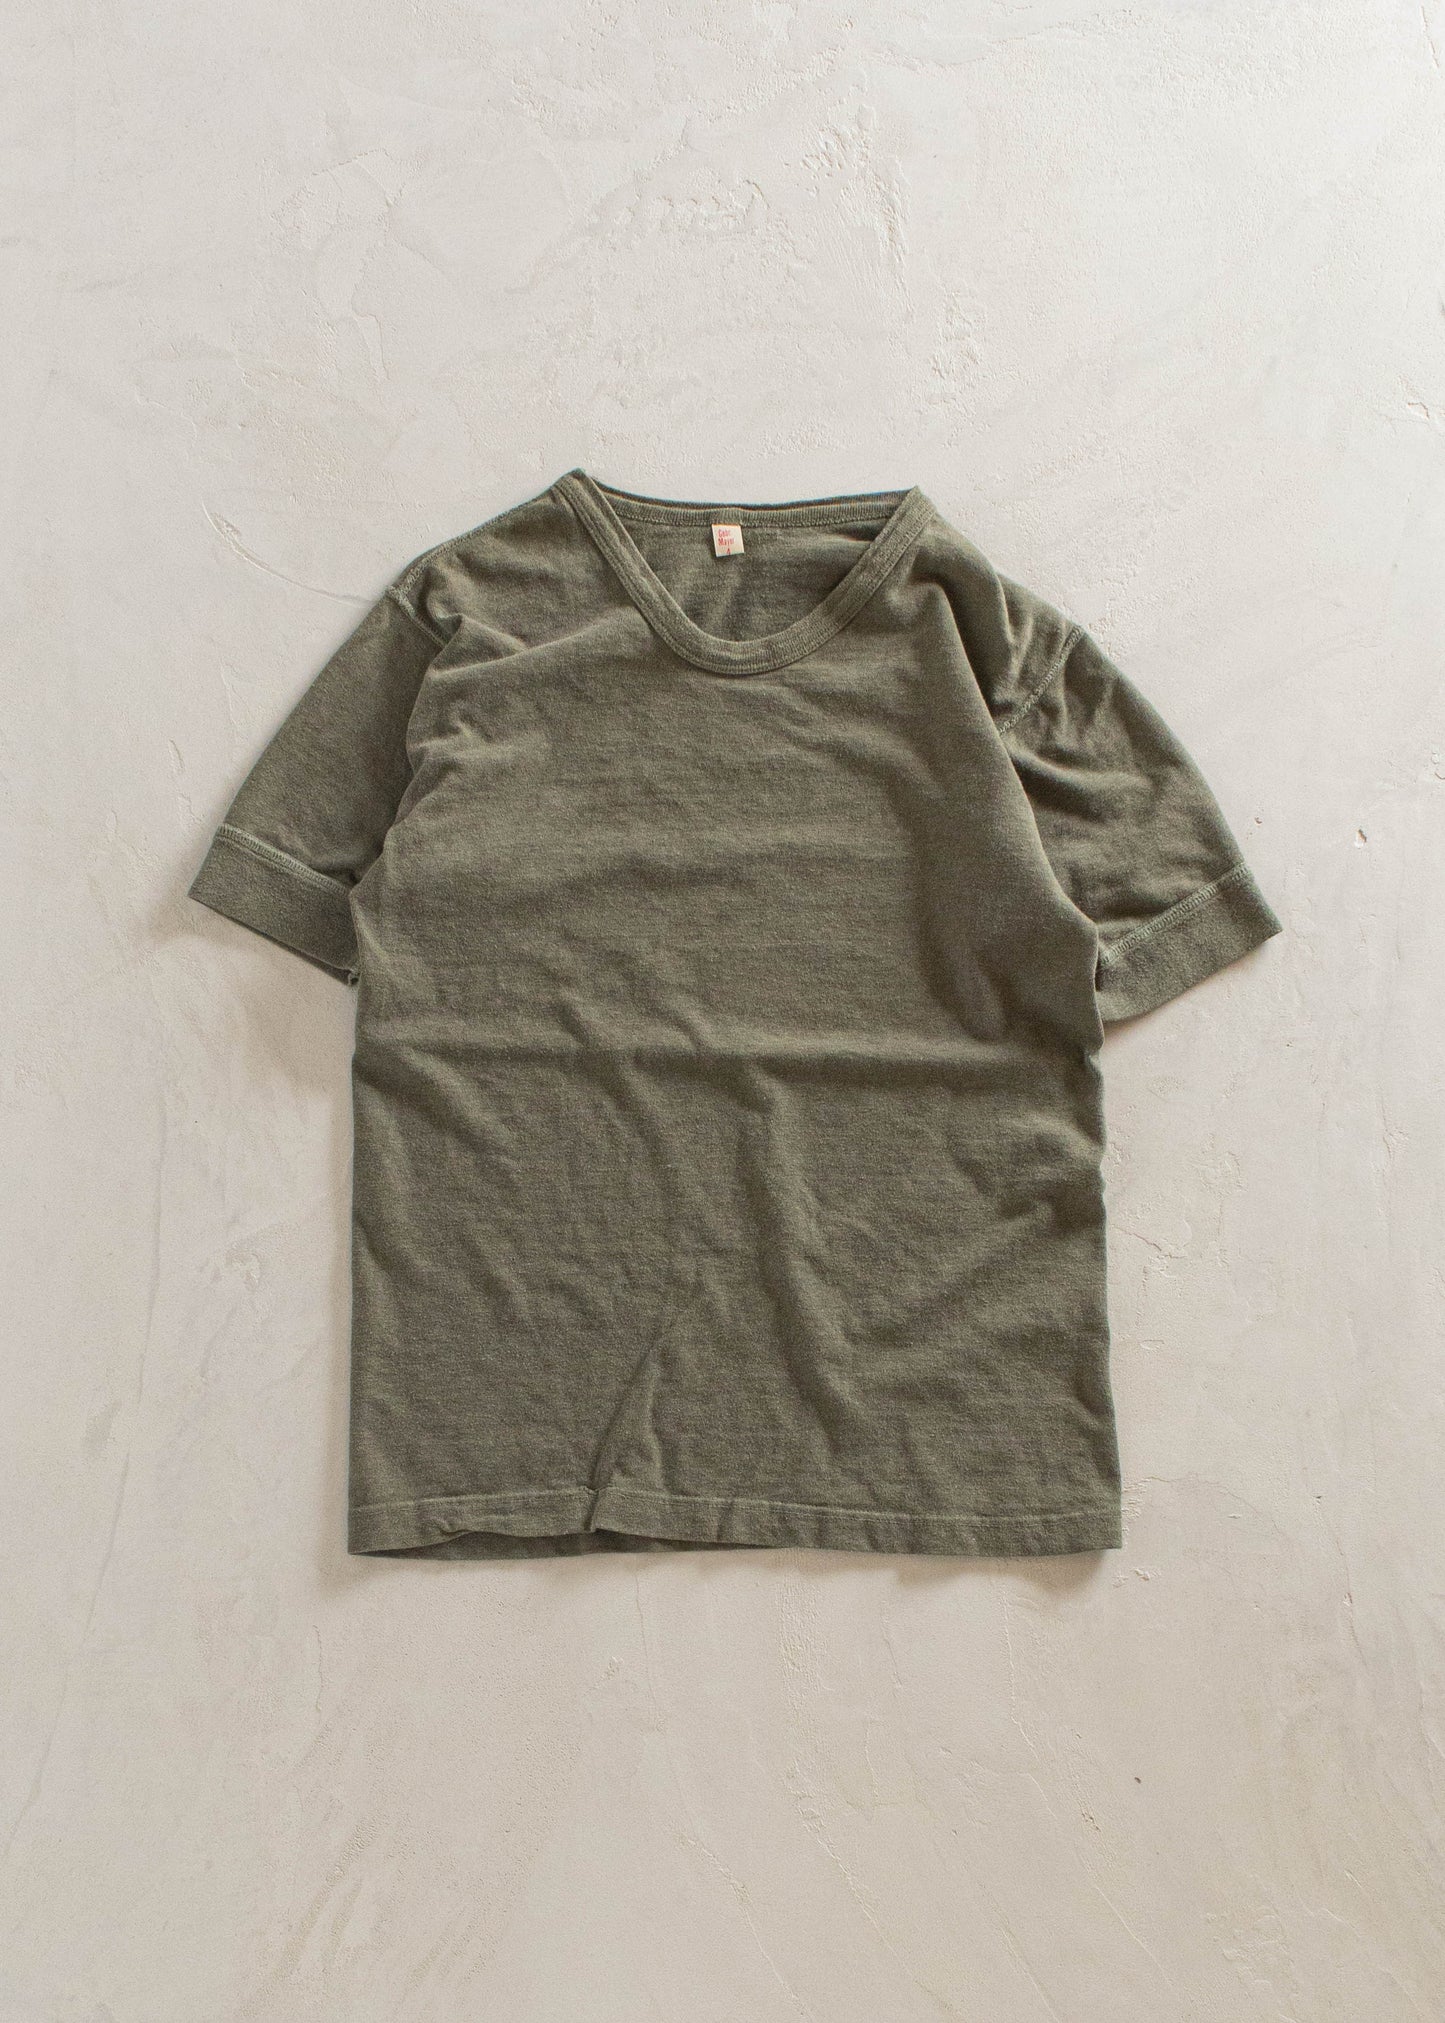 1980s Military T-Shirt Size XS/S